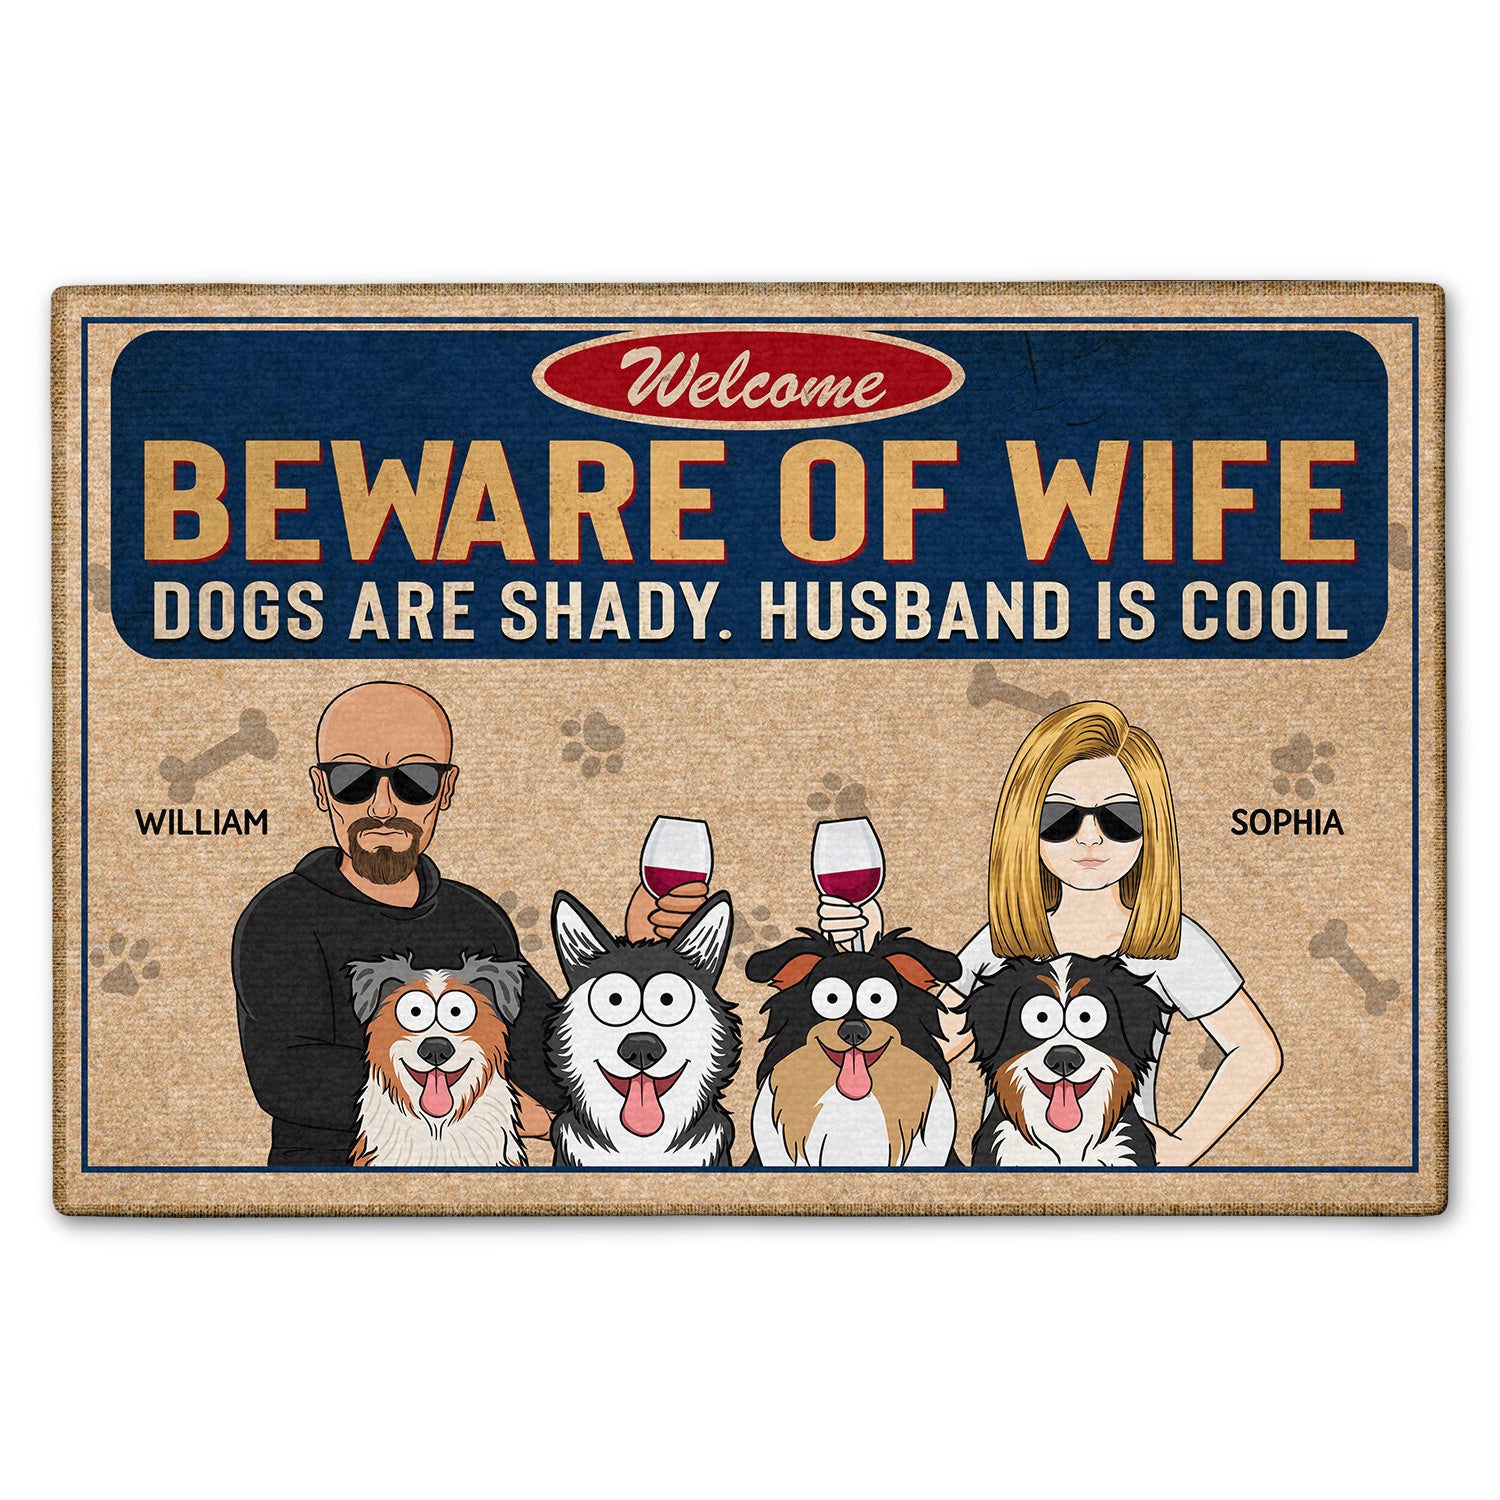 Beware Of Wife Dogs Are Shady Husband Is Cool Funny Cartoon Dog - Gift For Dog Lovers, Couples - Personalized Doormat